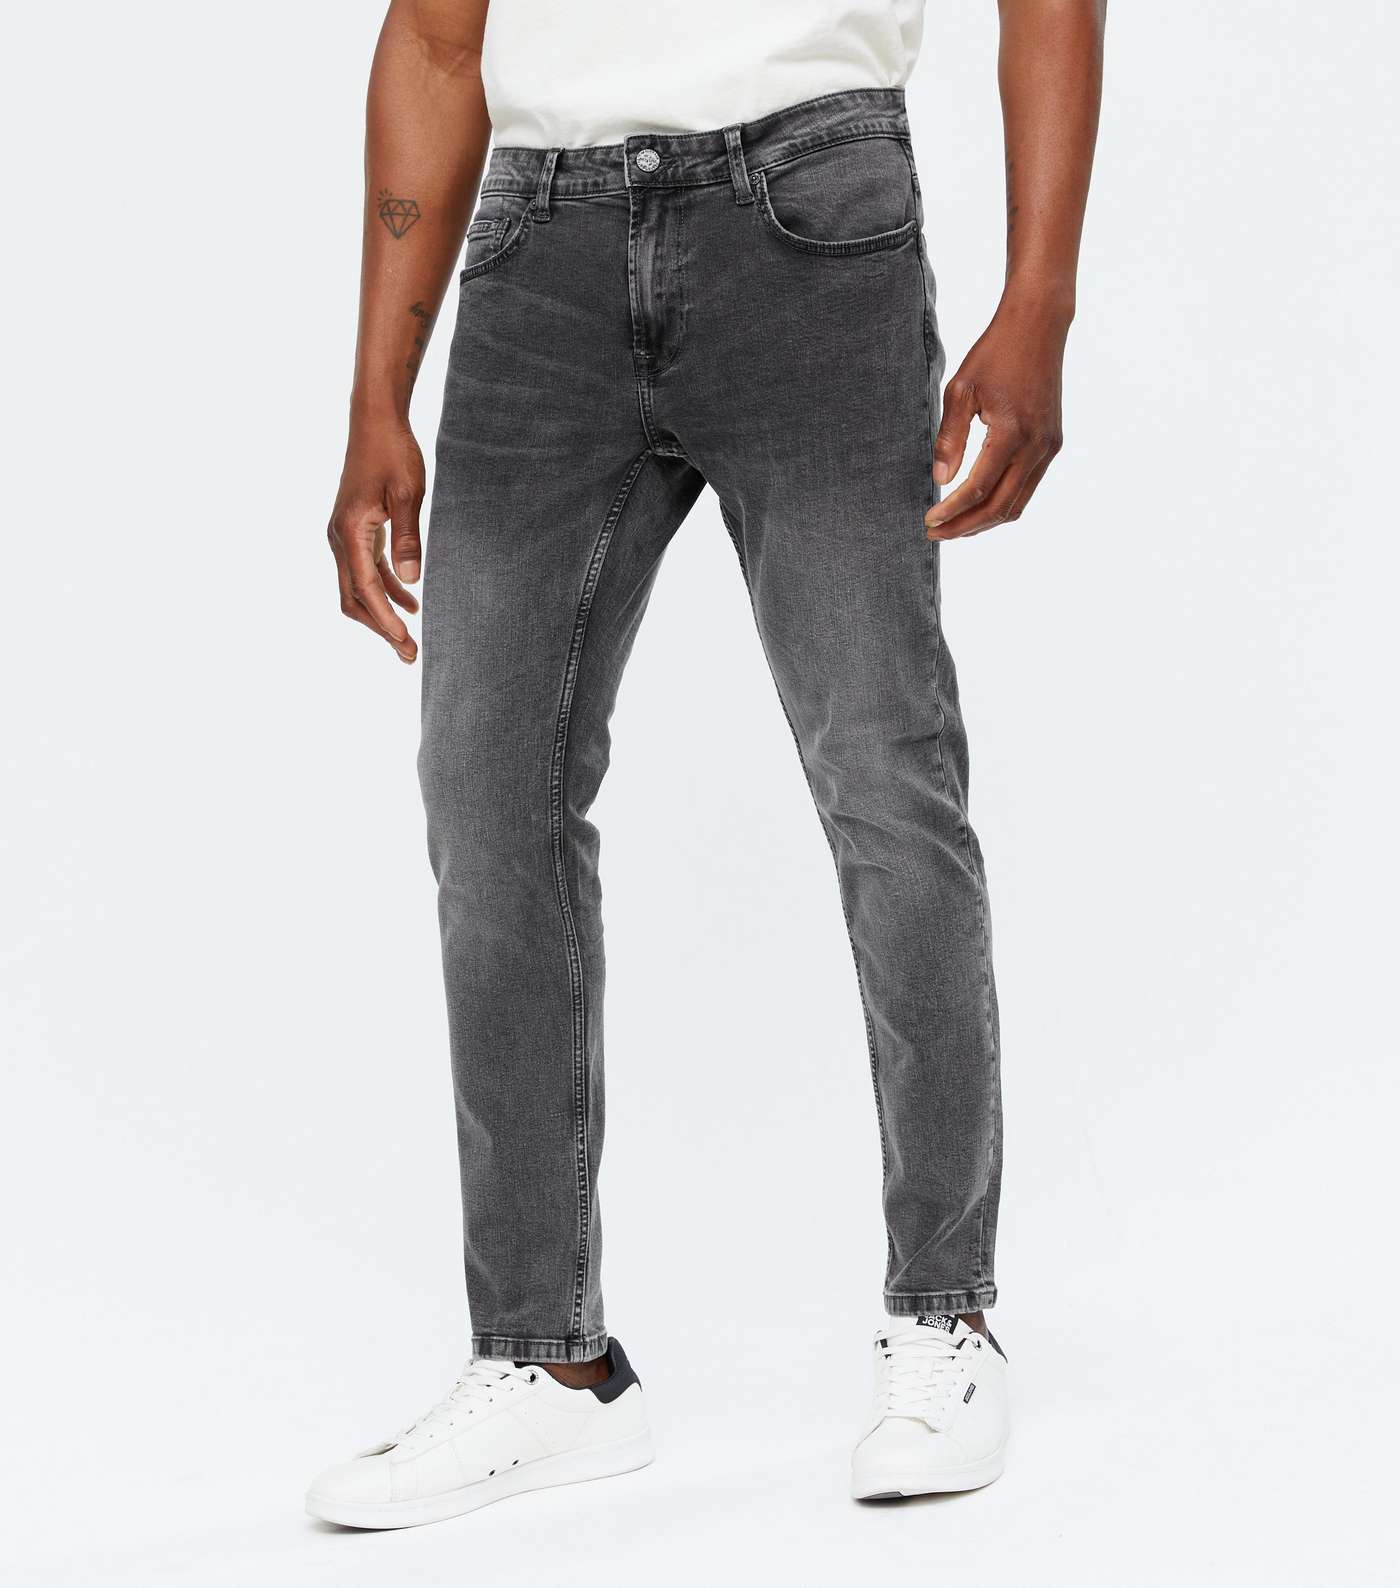 Only & Sons Dark Grey Washed Skinny Jeans Image 2